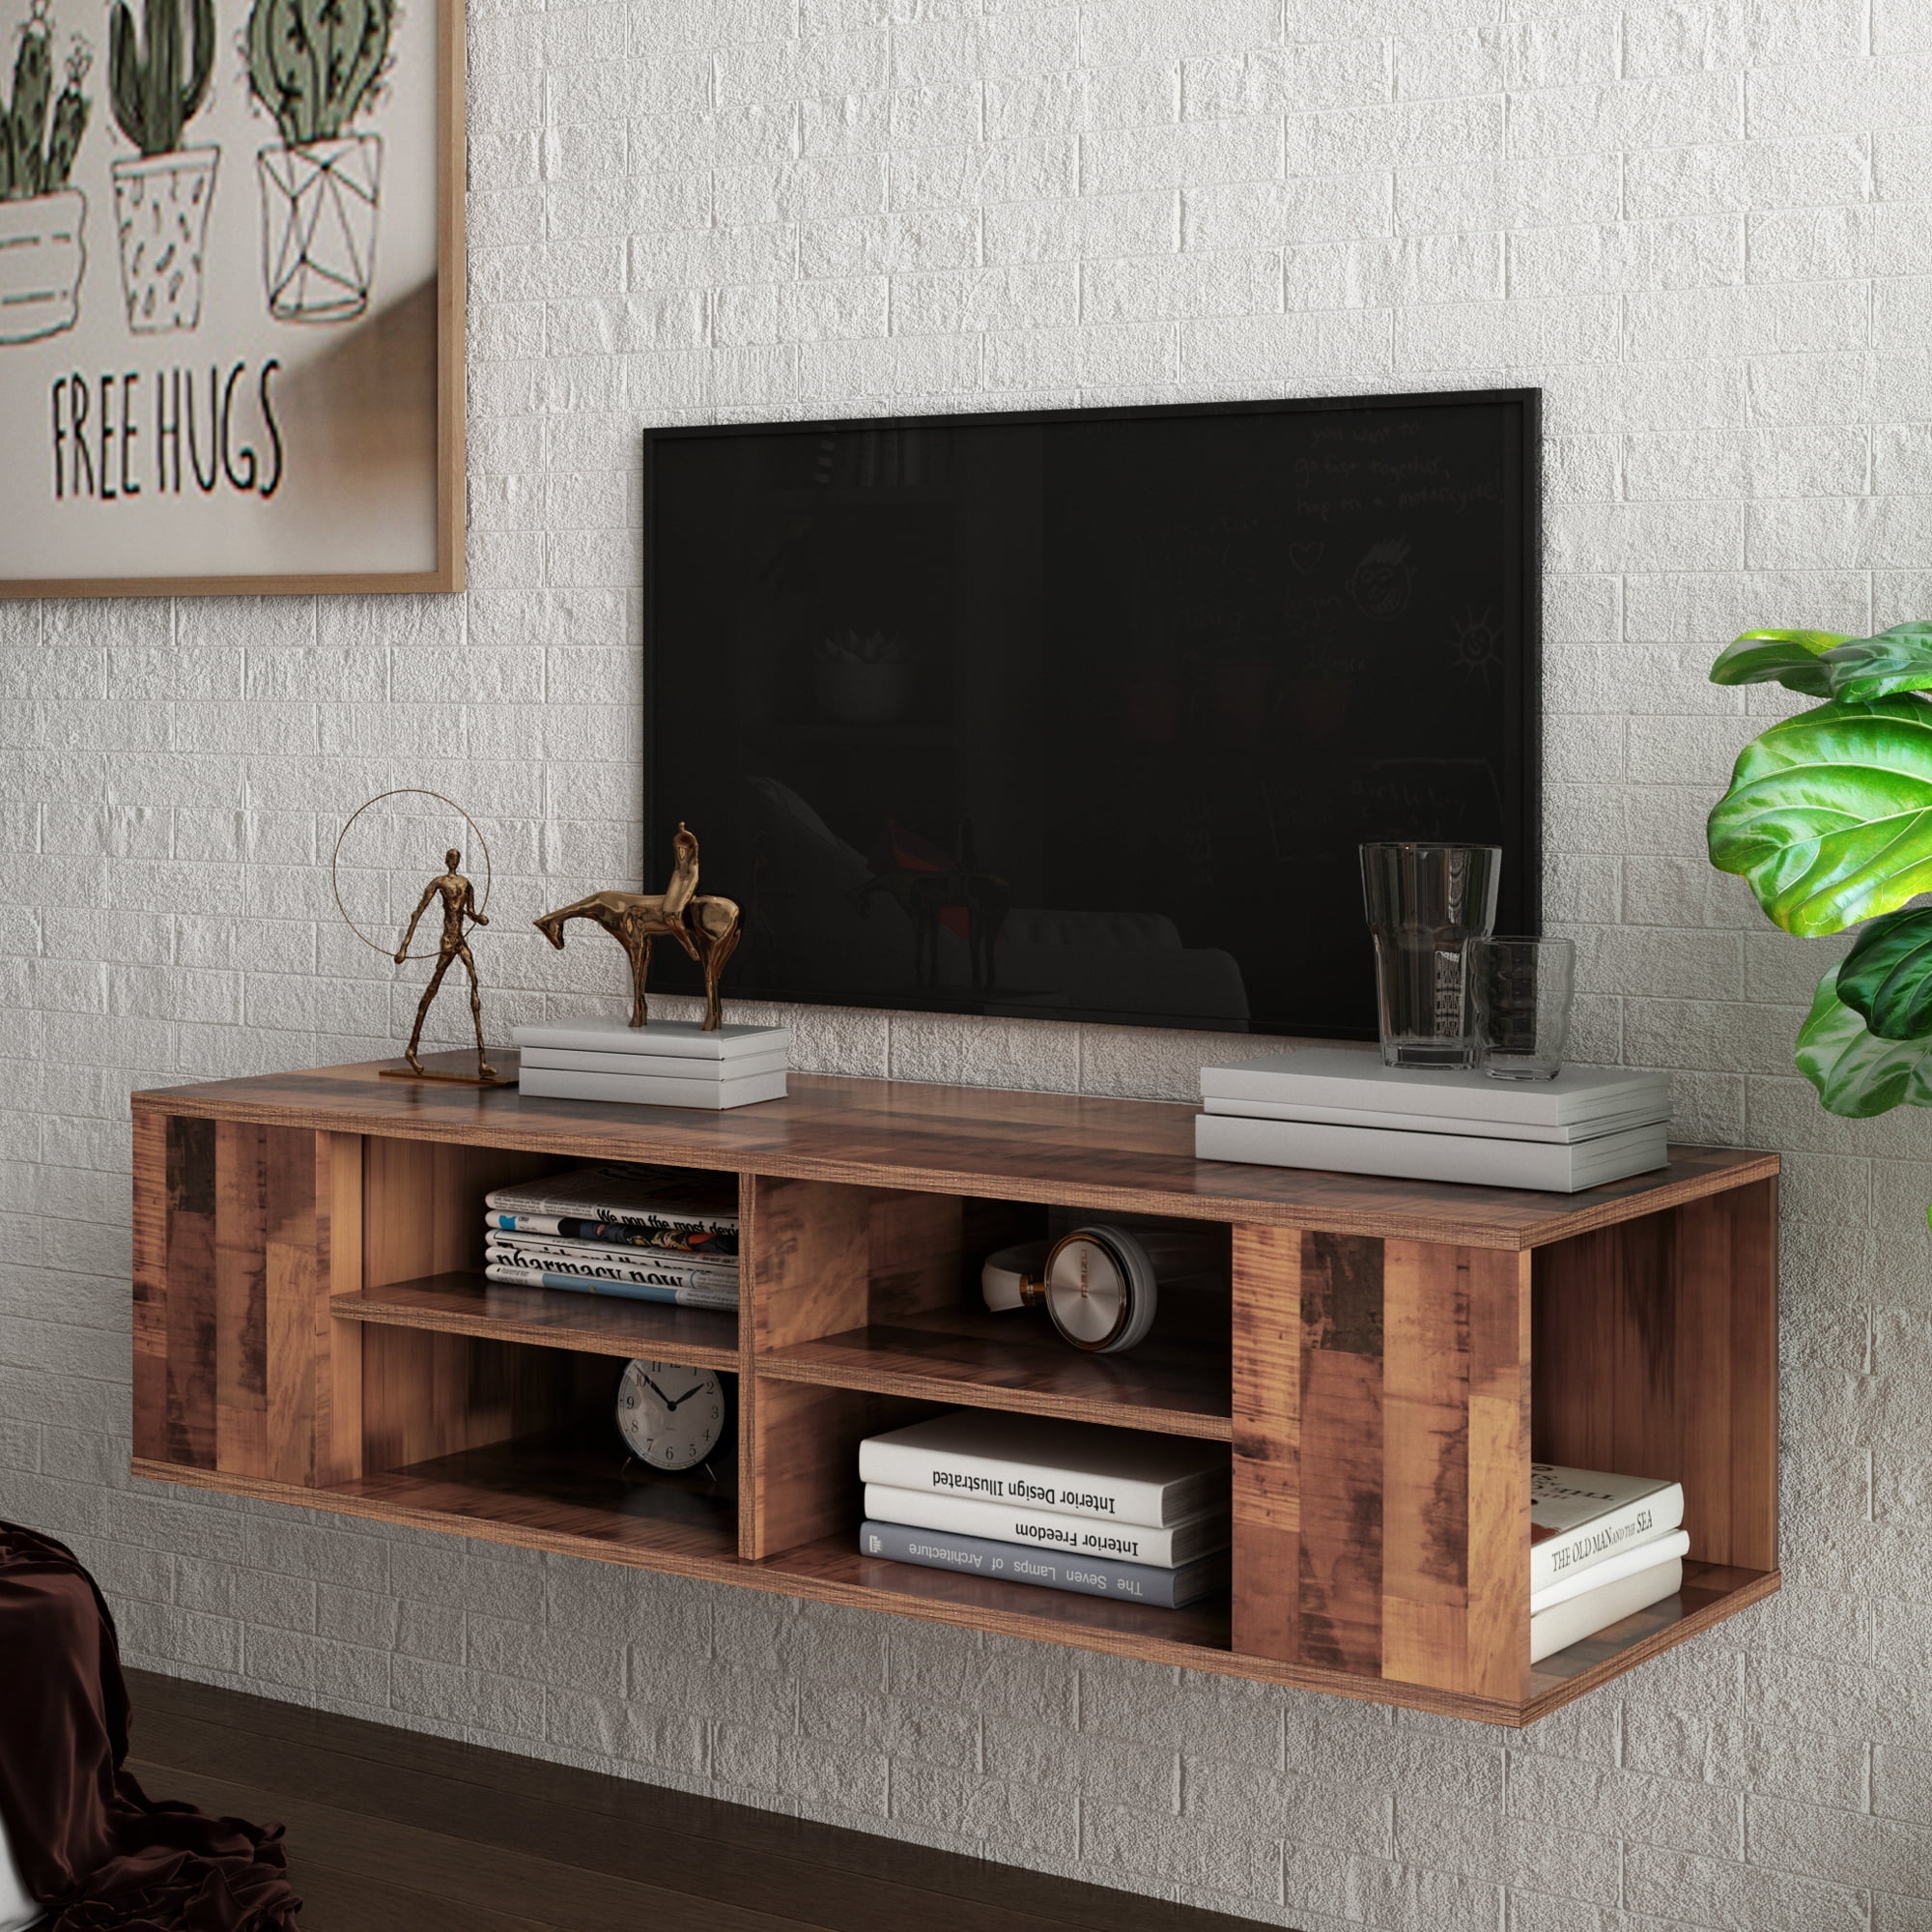 Details about   TV Stand Floating Shelf Black Wall Mounted Storage Cabinet Console Entertainment 